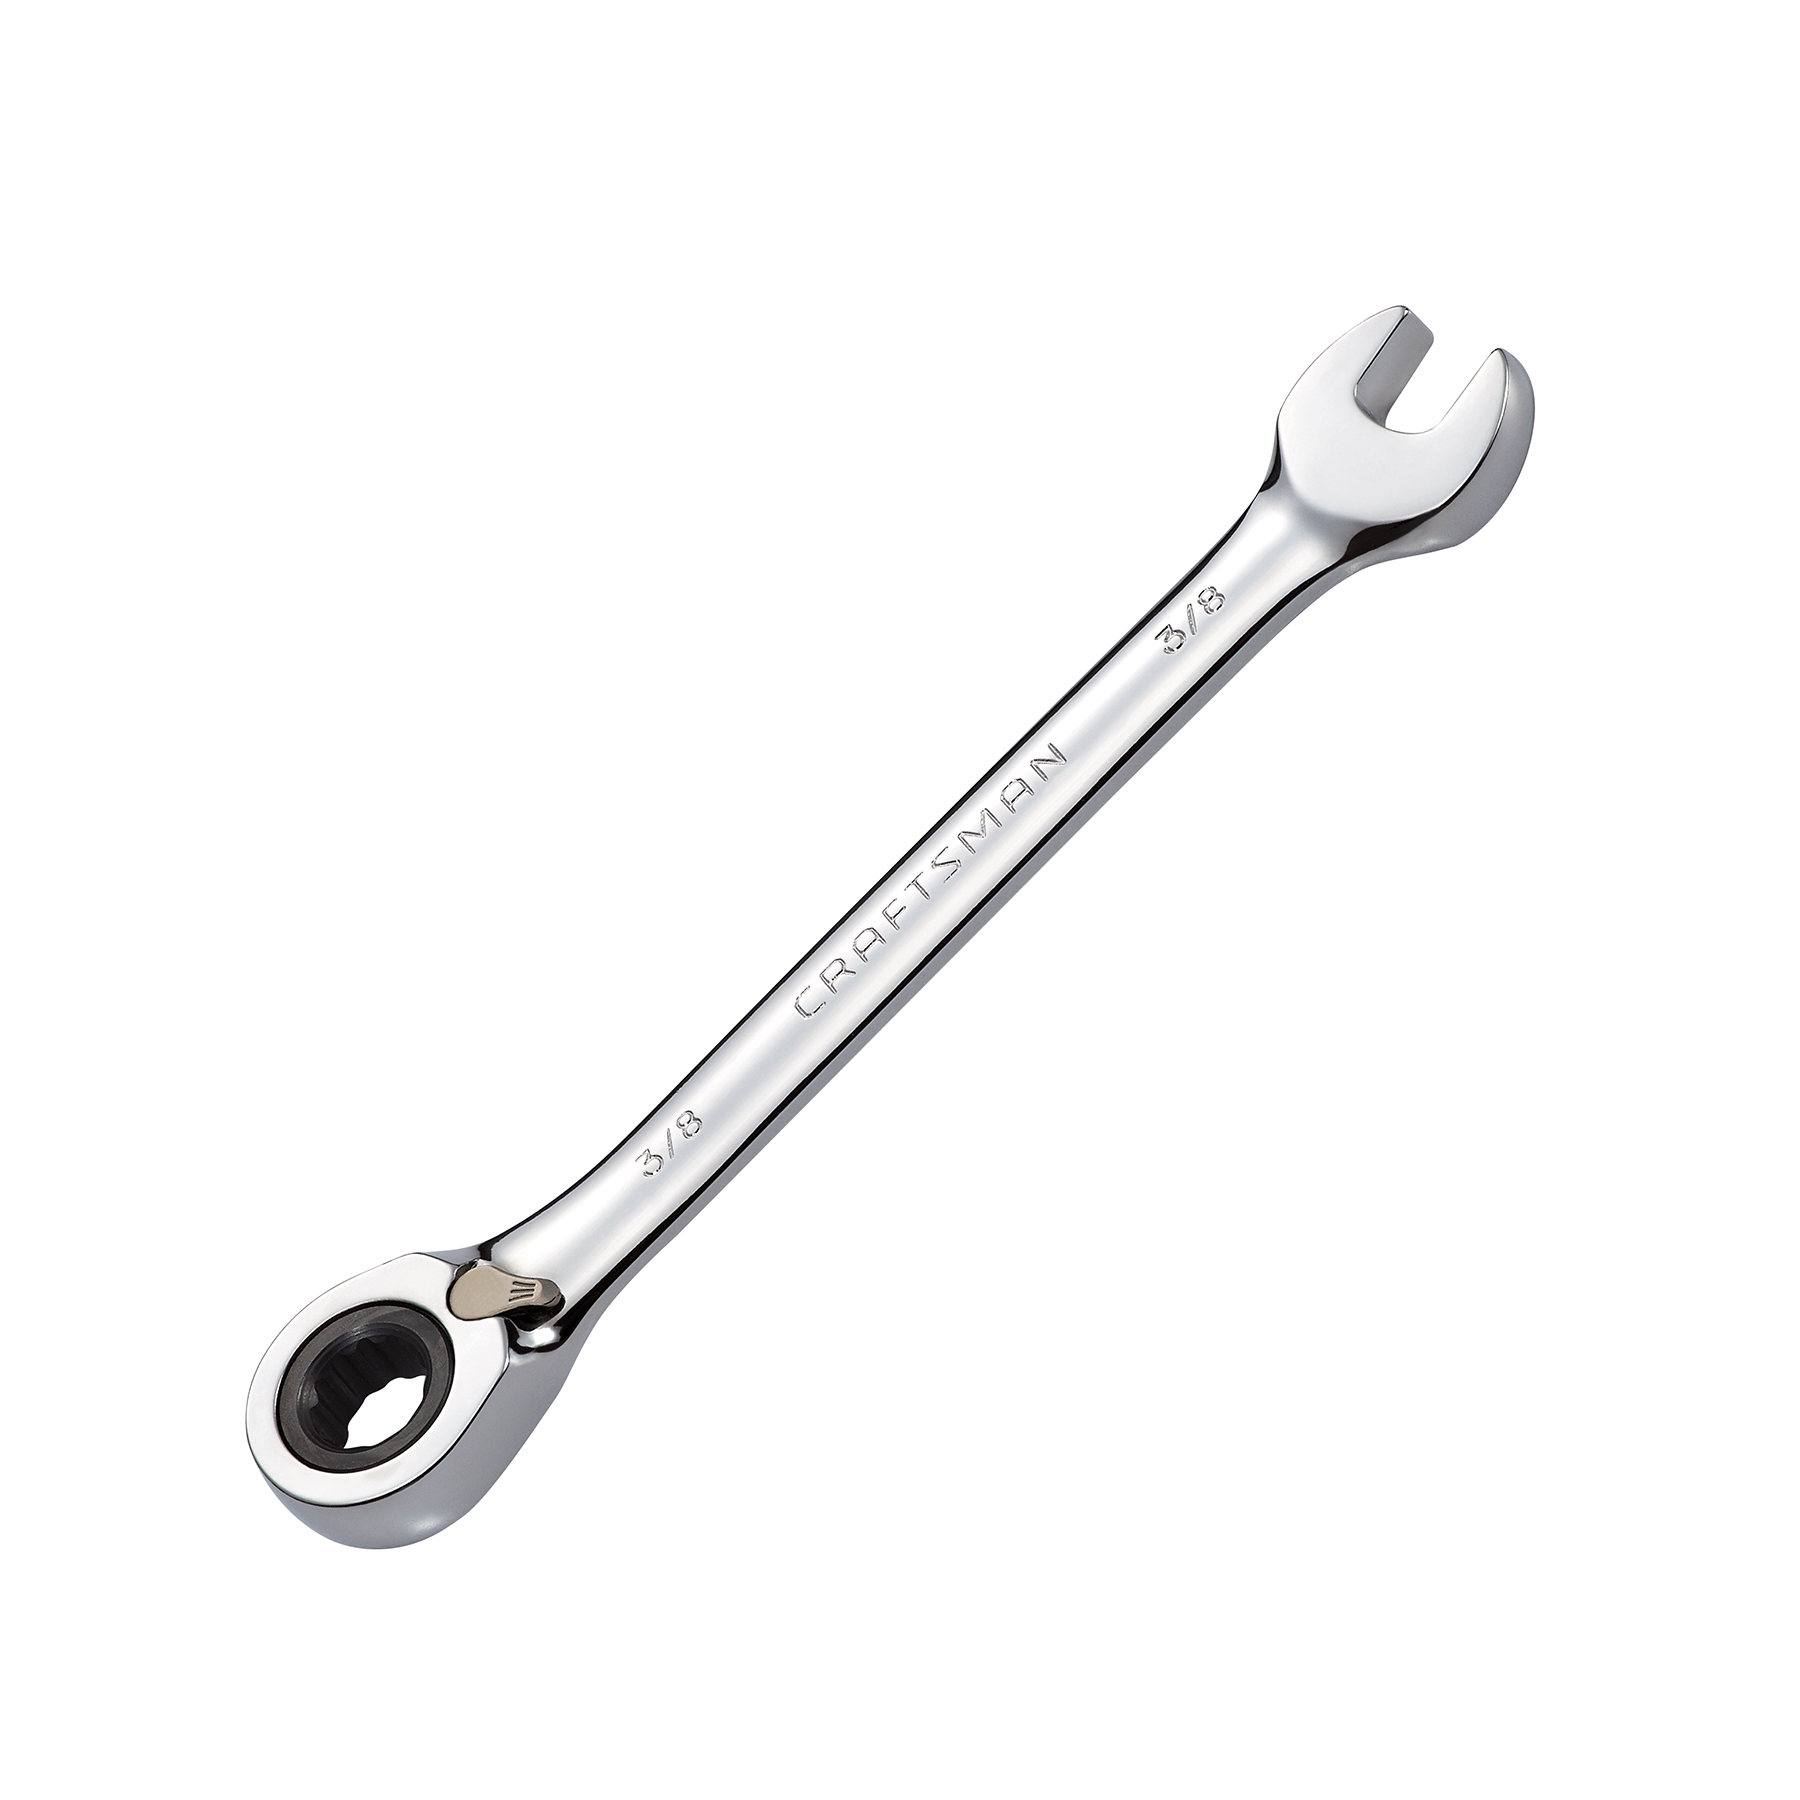 Craftsman 3/8 in. Reversible Ratcheting Combination Wrench